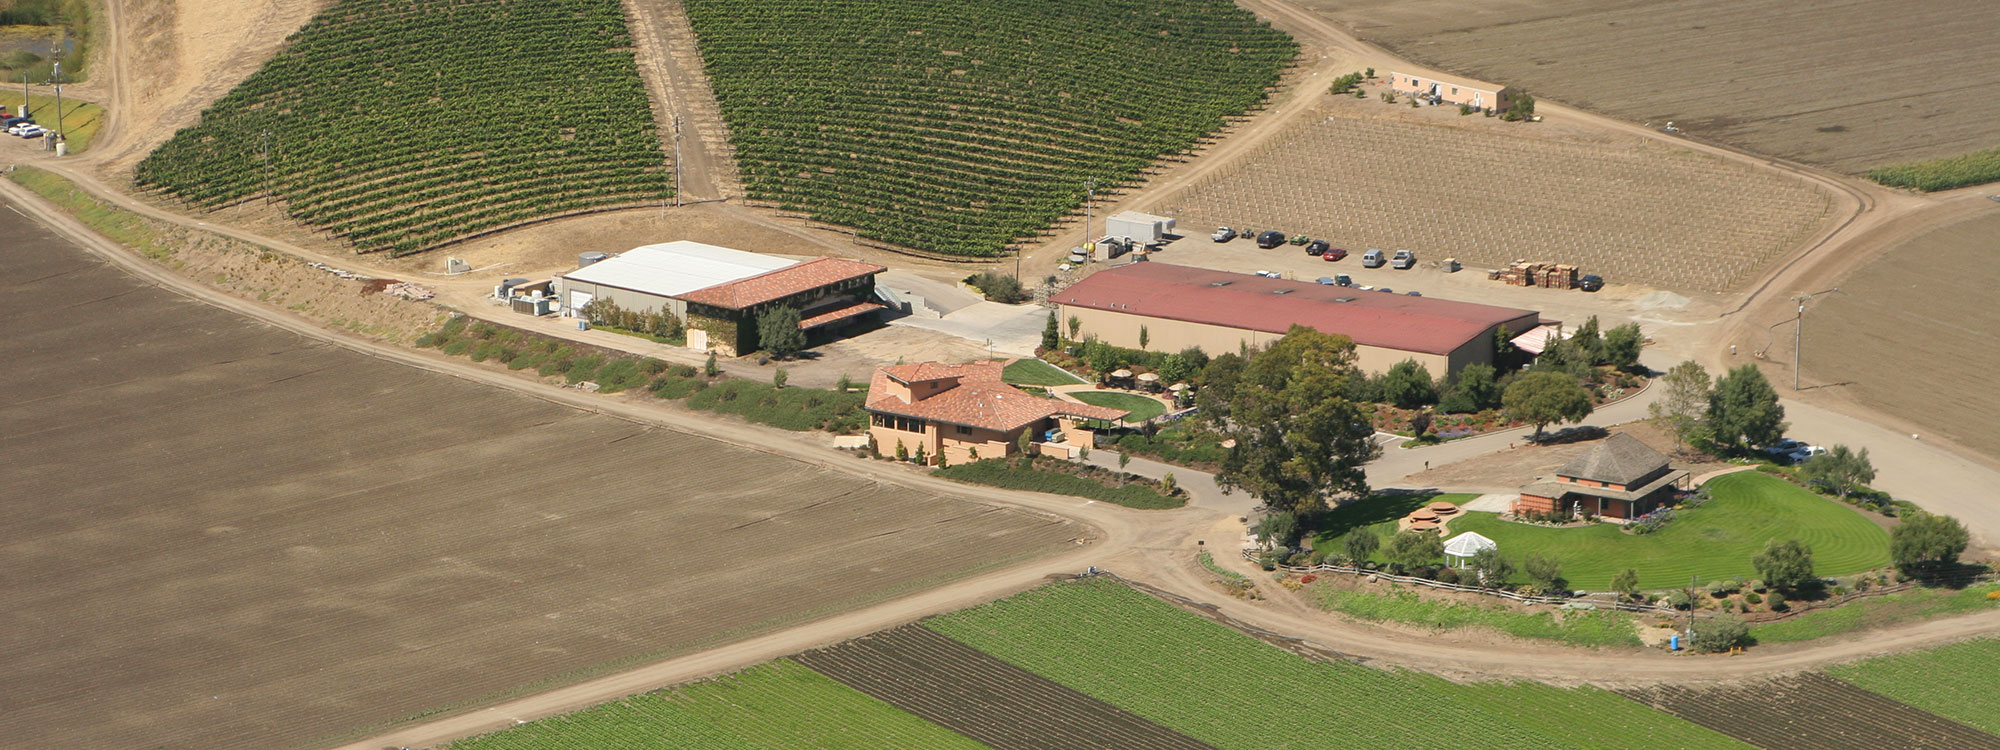 Paso Robles Contractor - Winery Construction Crew - JW Design & Construction